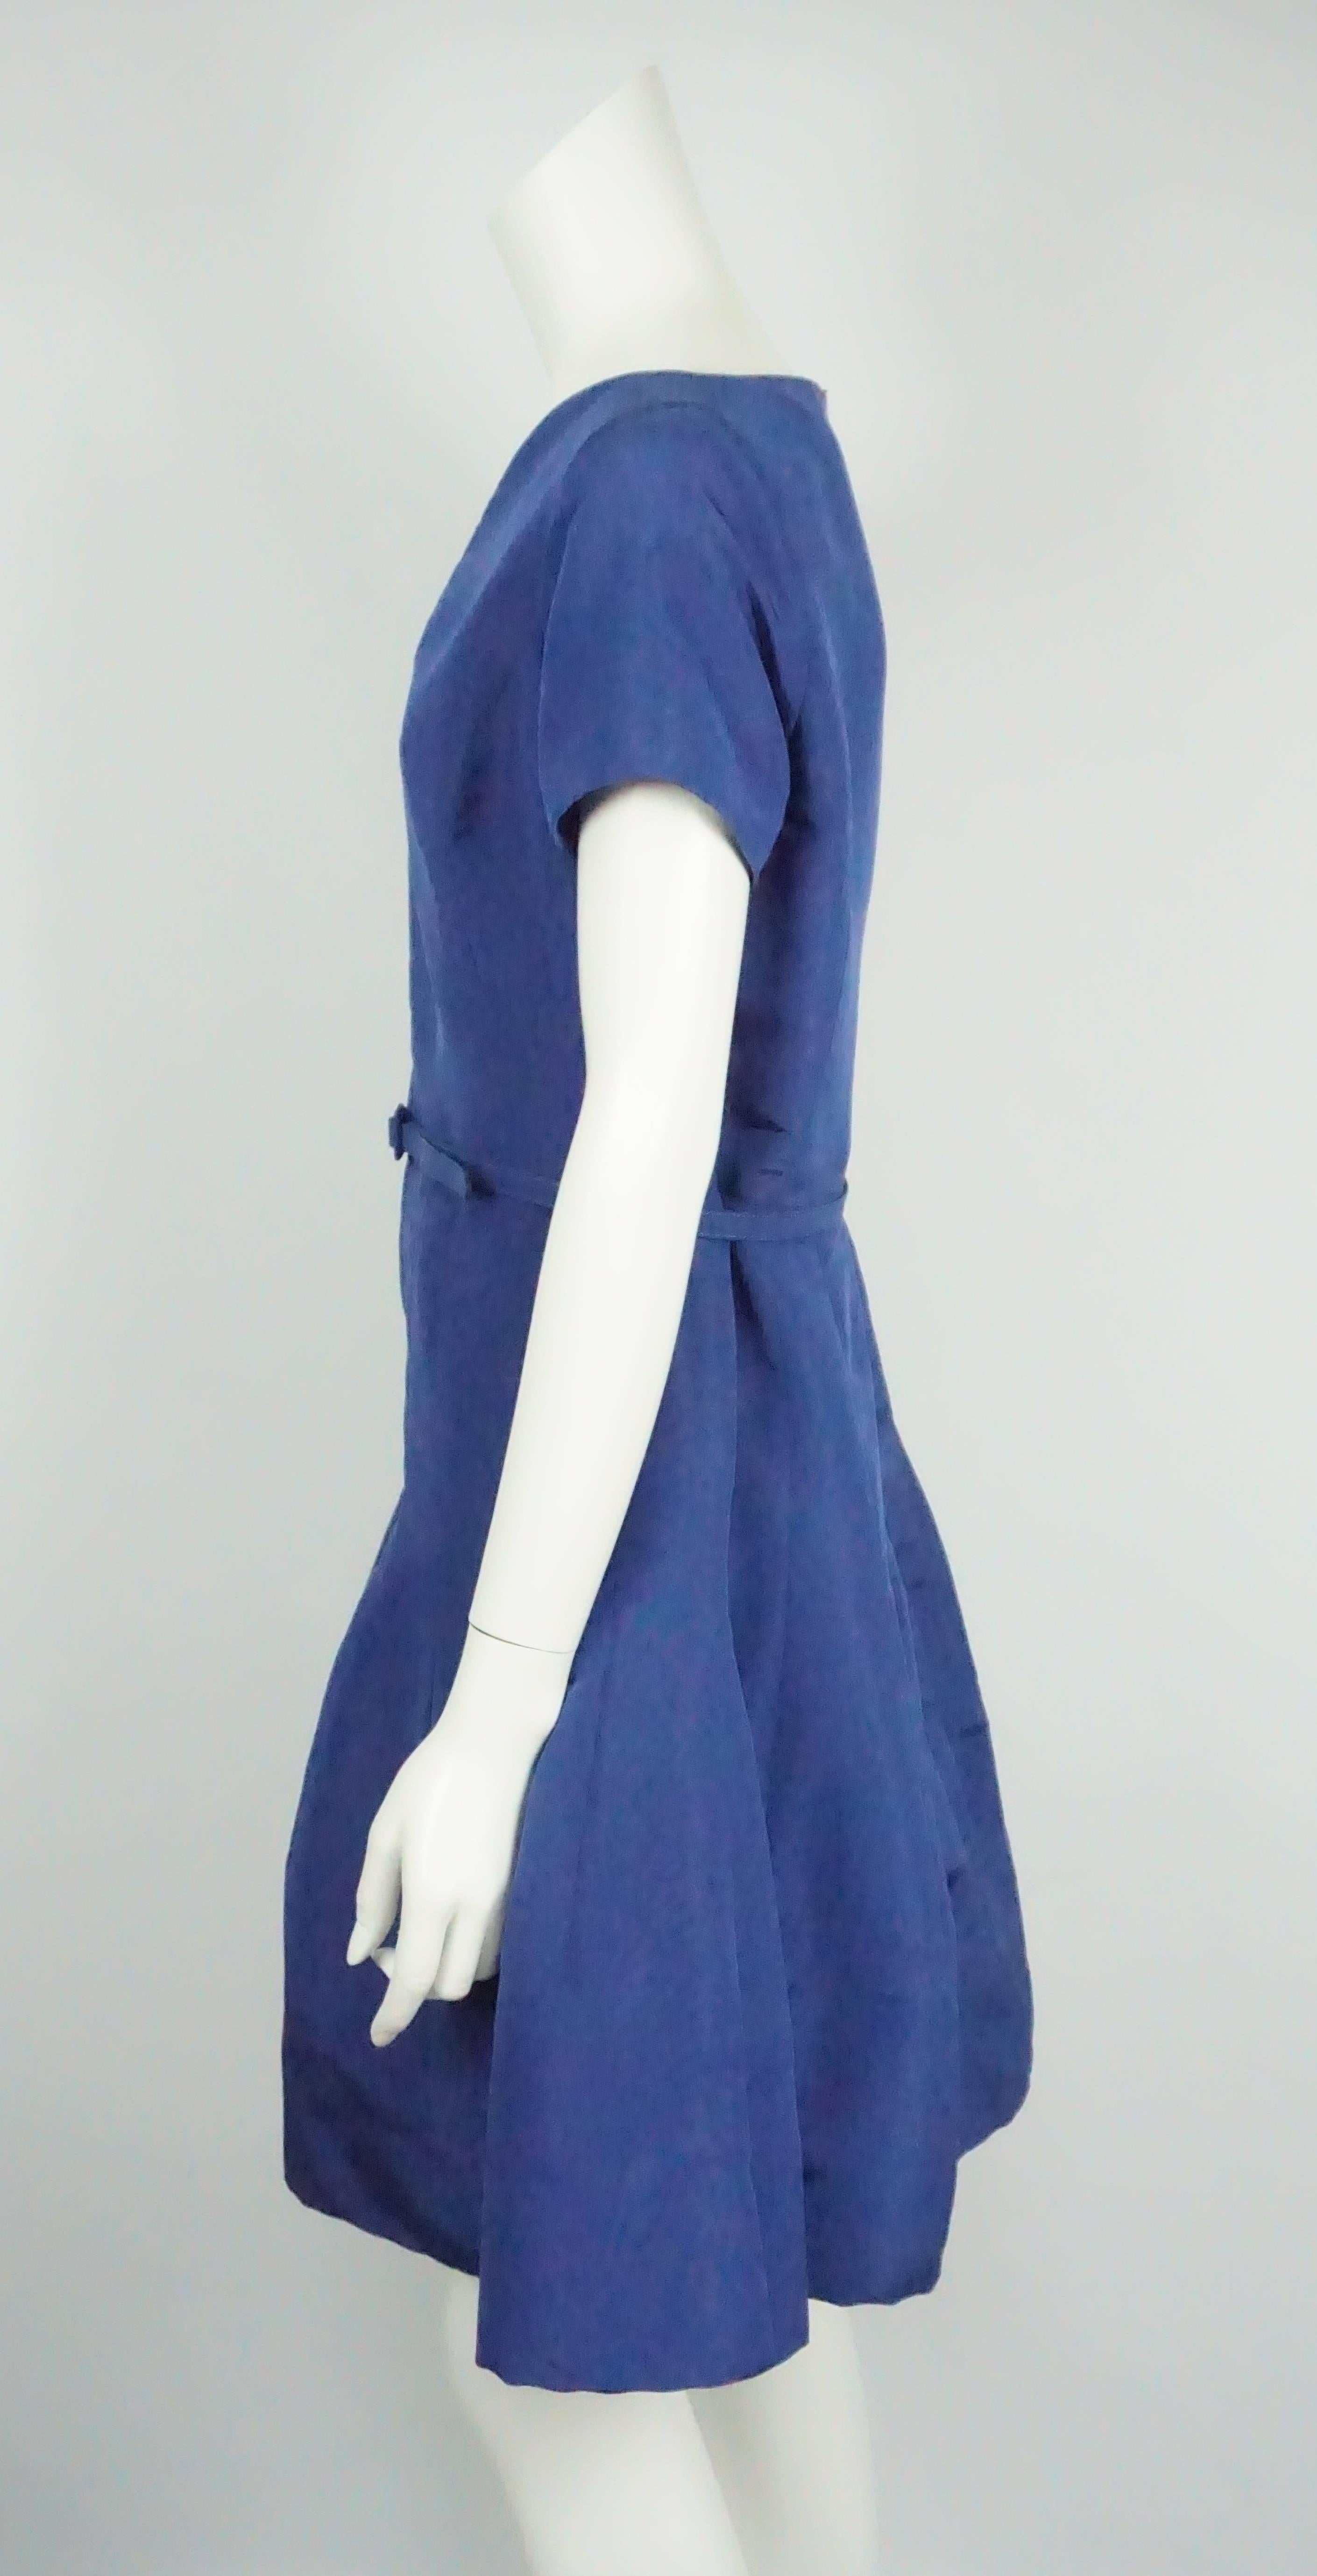 Oscar De La Renta Electric Blue Taffeta S/S Dress - 10  2015 collection. This elegant bubble skirt dress is made of silk. It has a short sleeve and a v-neck. The dress cinches in at the waist with a belt. There is a detail from the waist down that